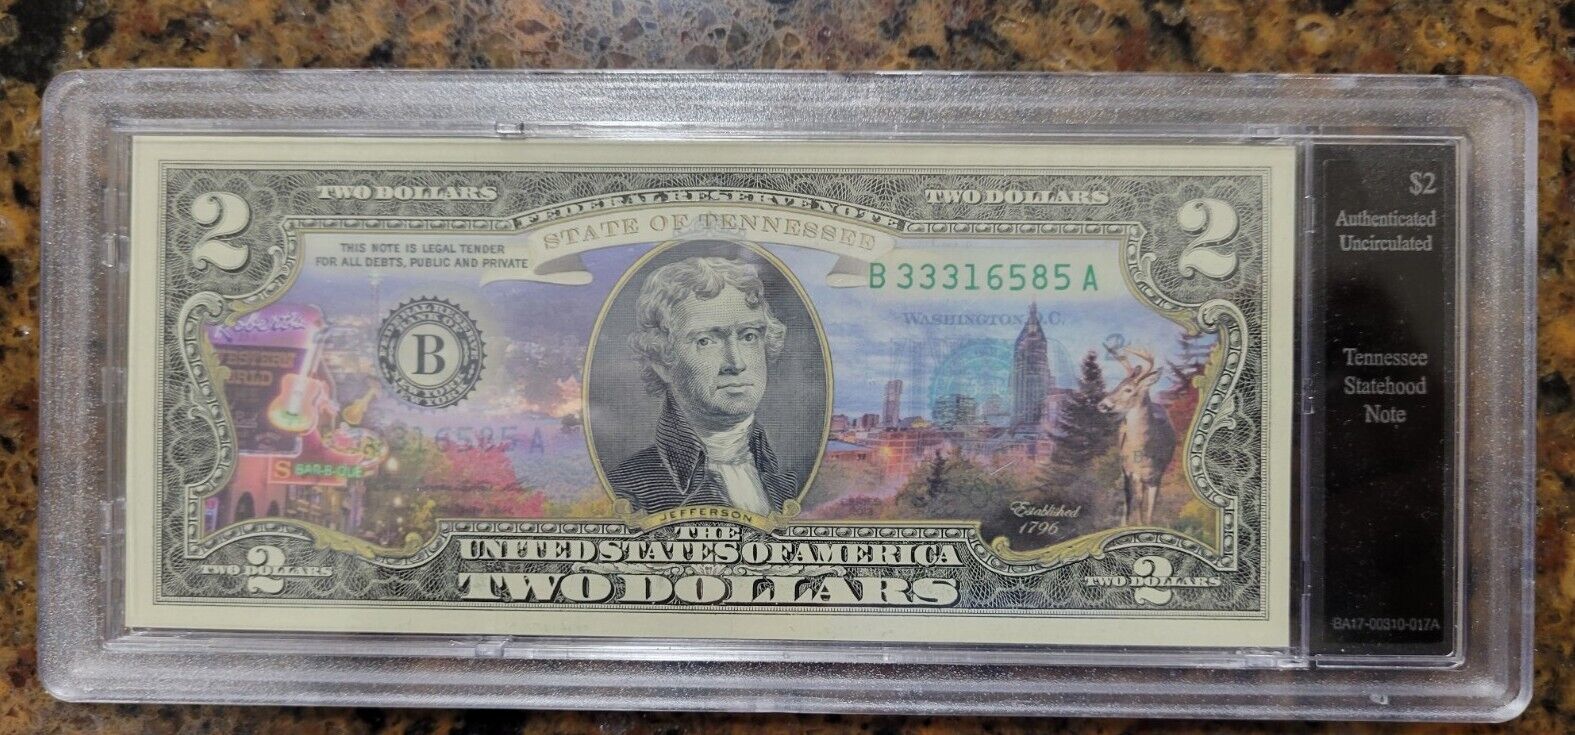 TENNESSEE Statehood Colorized $2 Bill *Legal Tender* in hard case